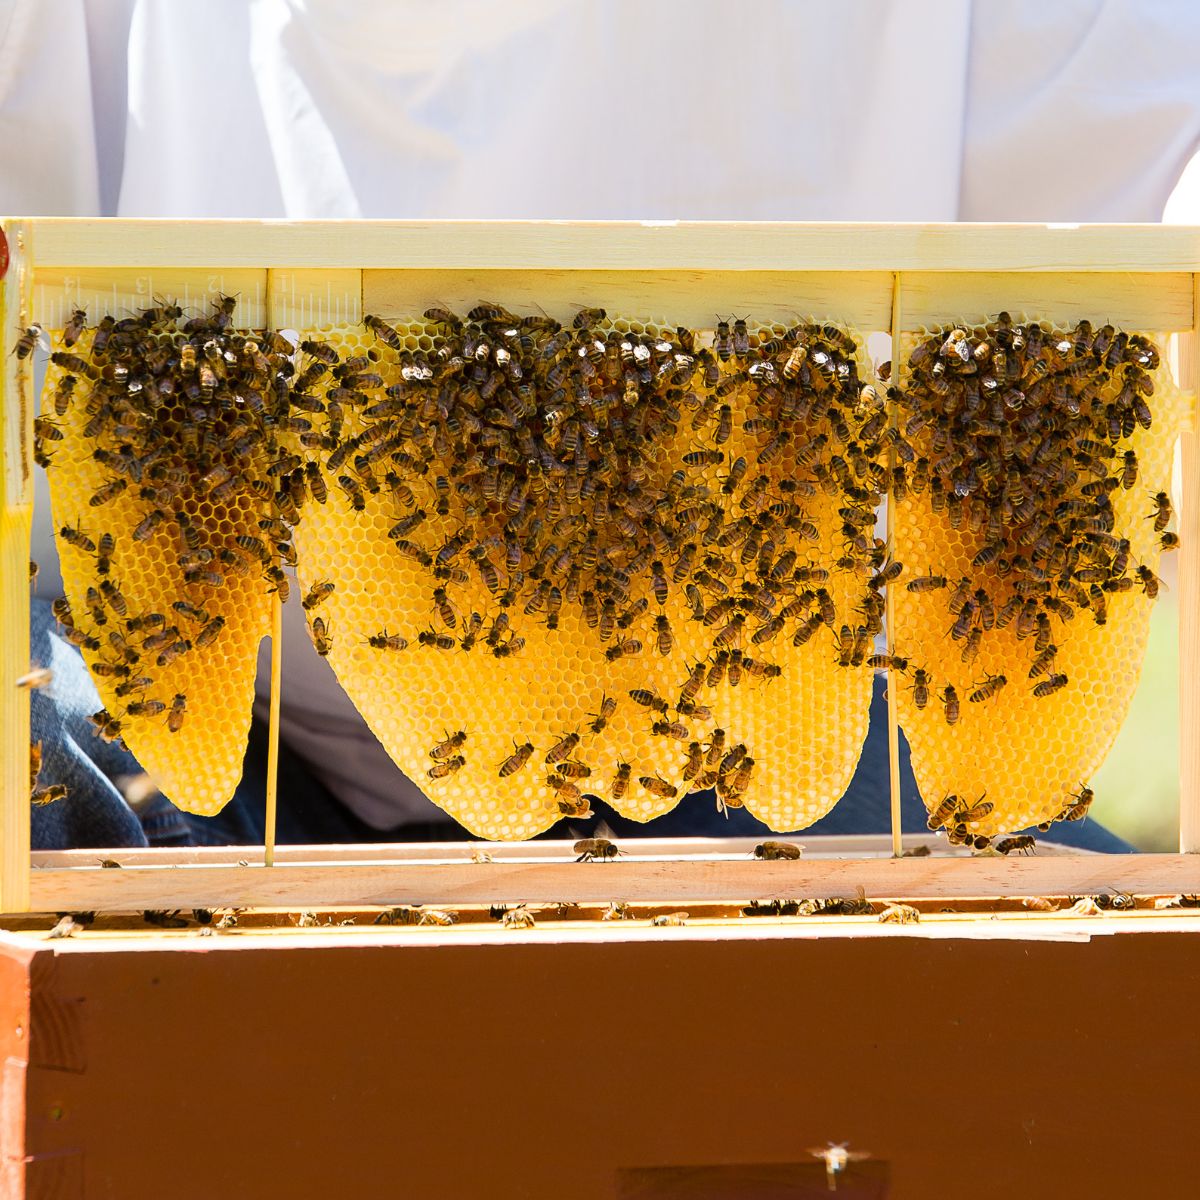 bees on honeycomb.